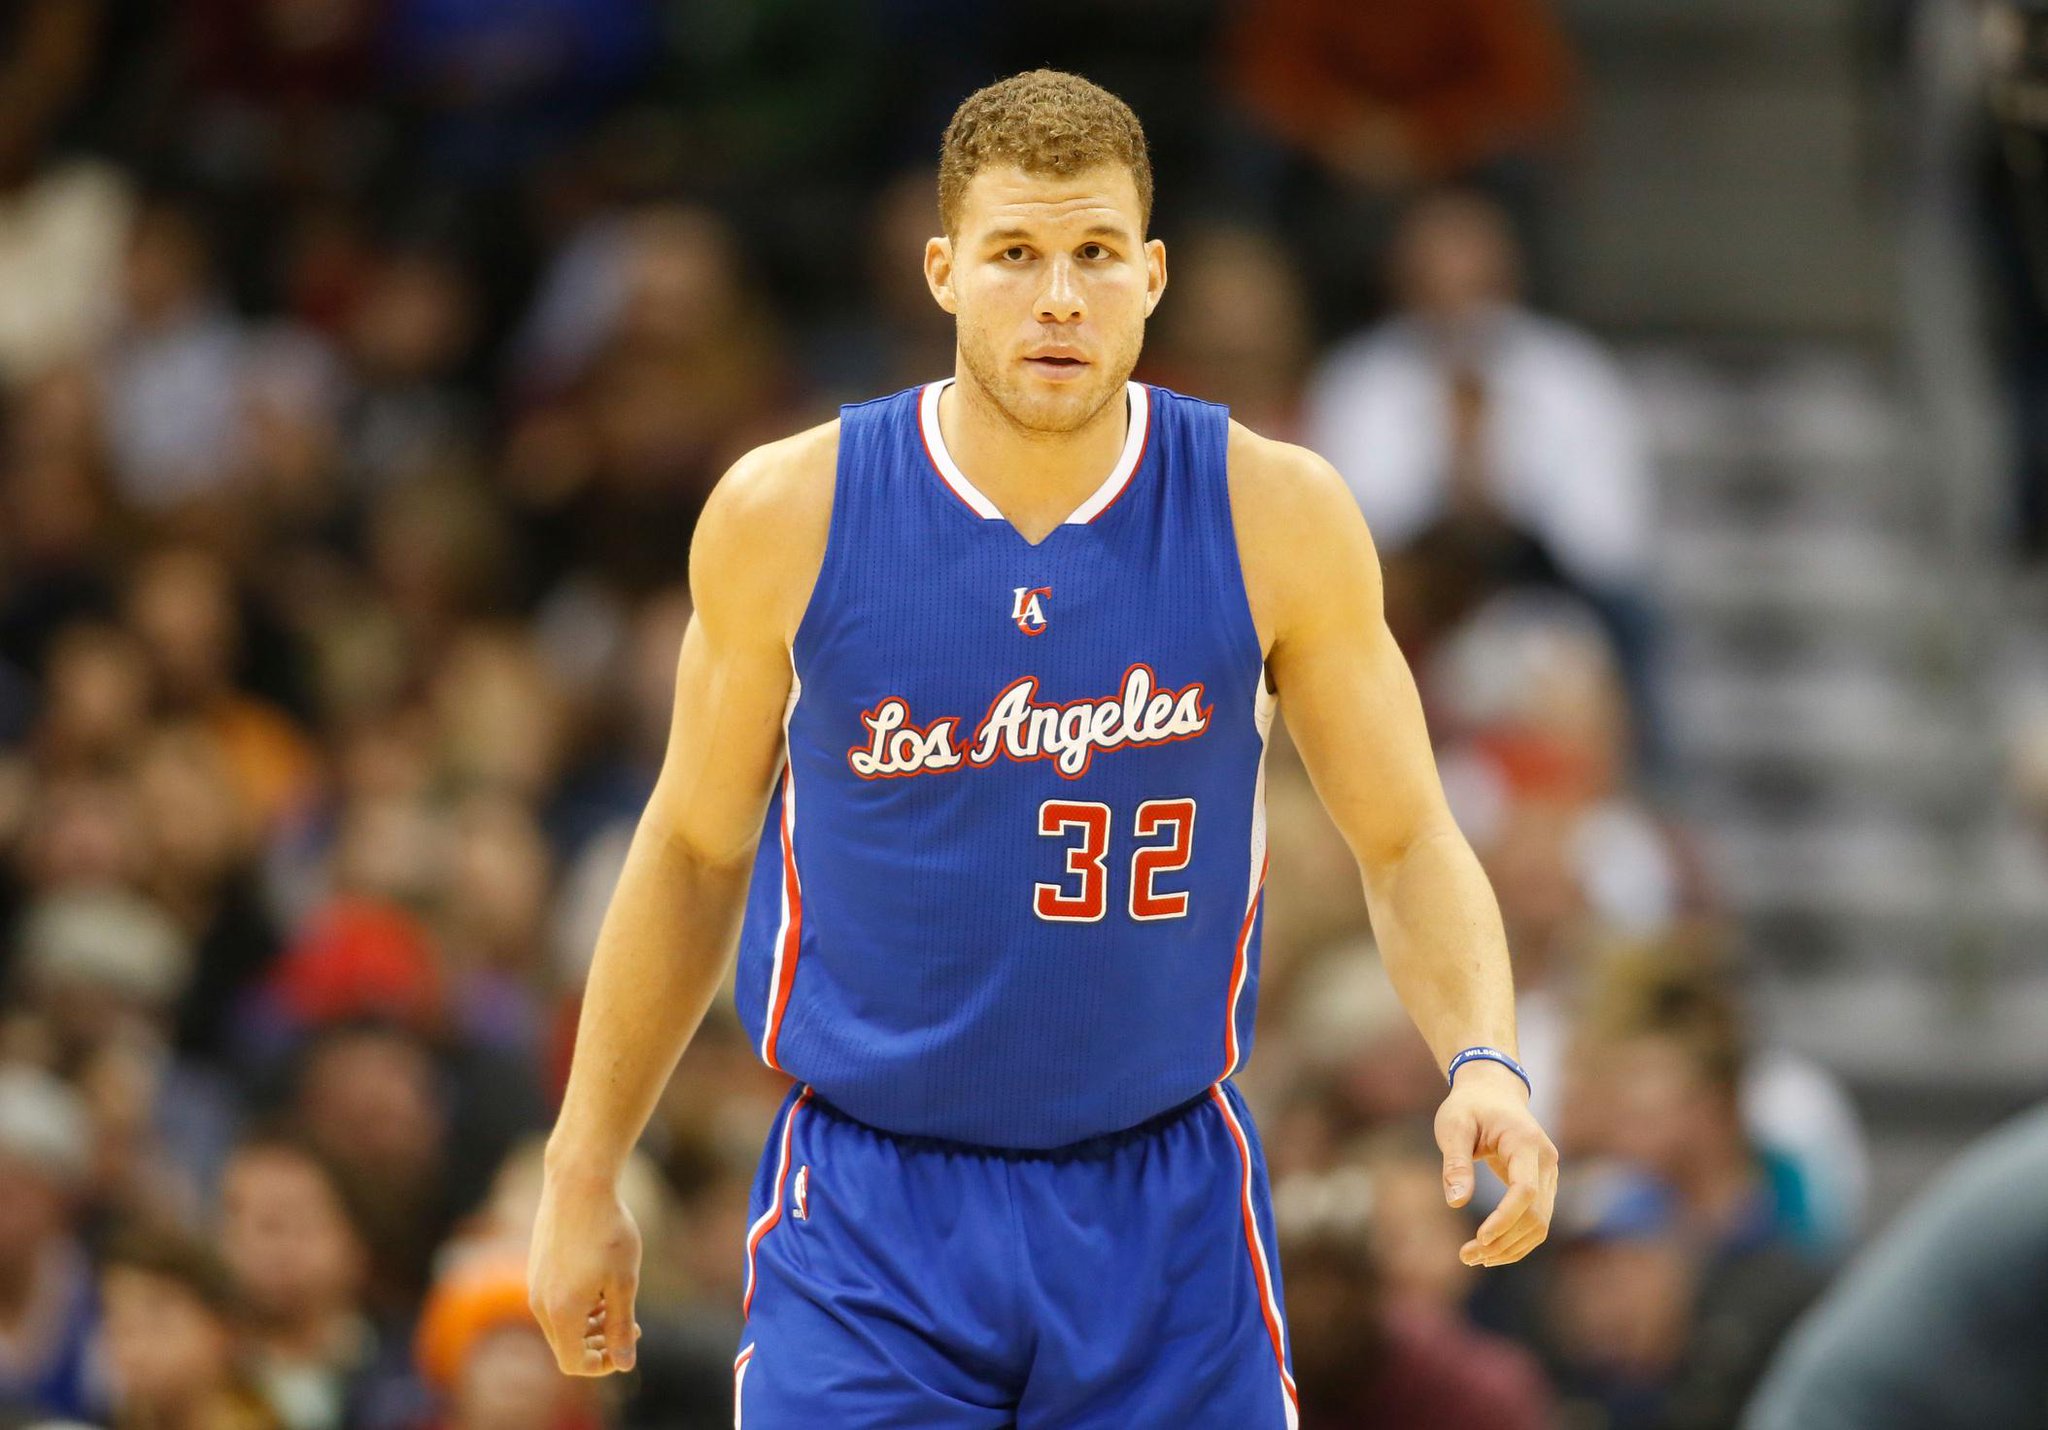   Happy 26th birthday to Clippers superstar BLAKE GRIFFIN! 